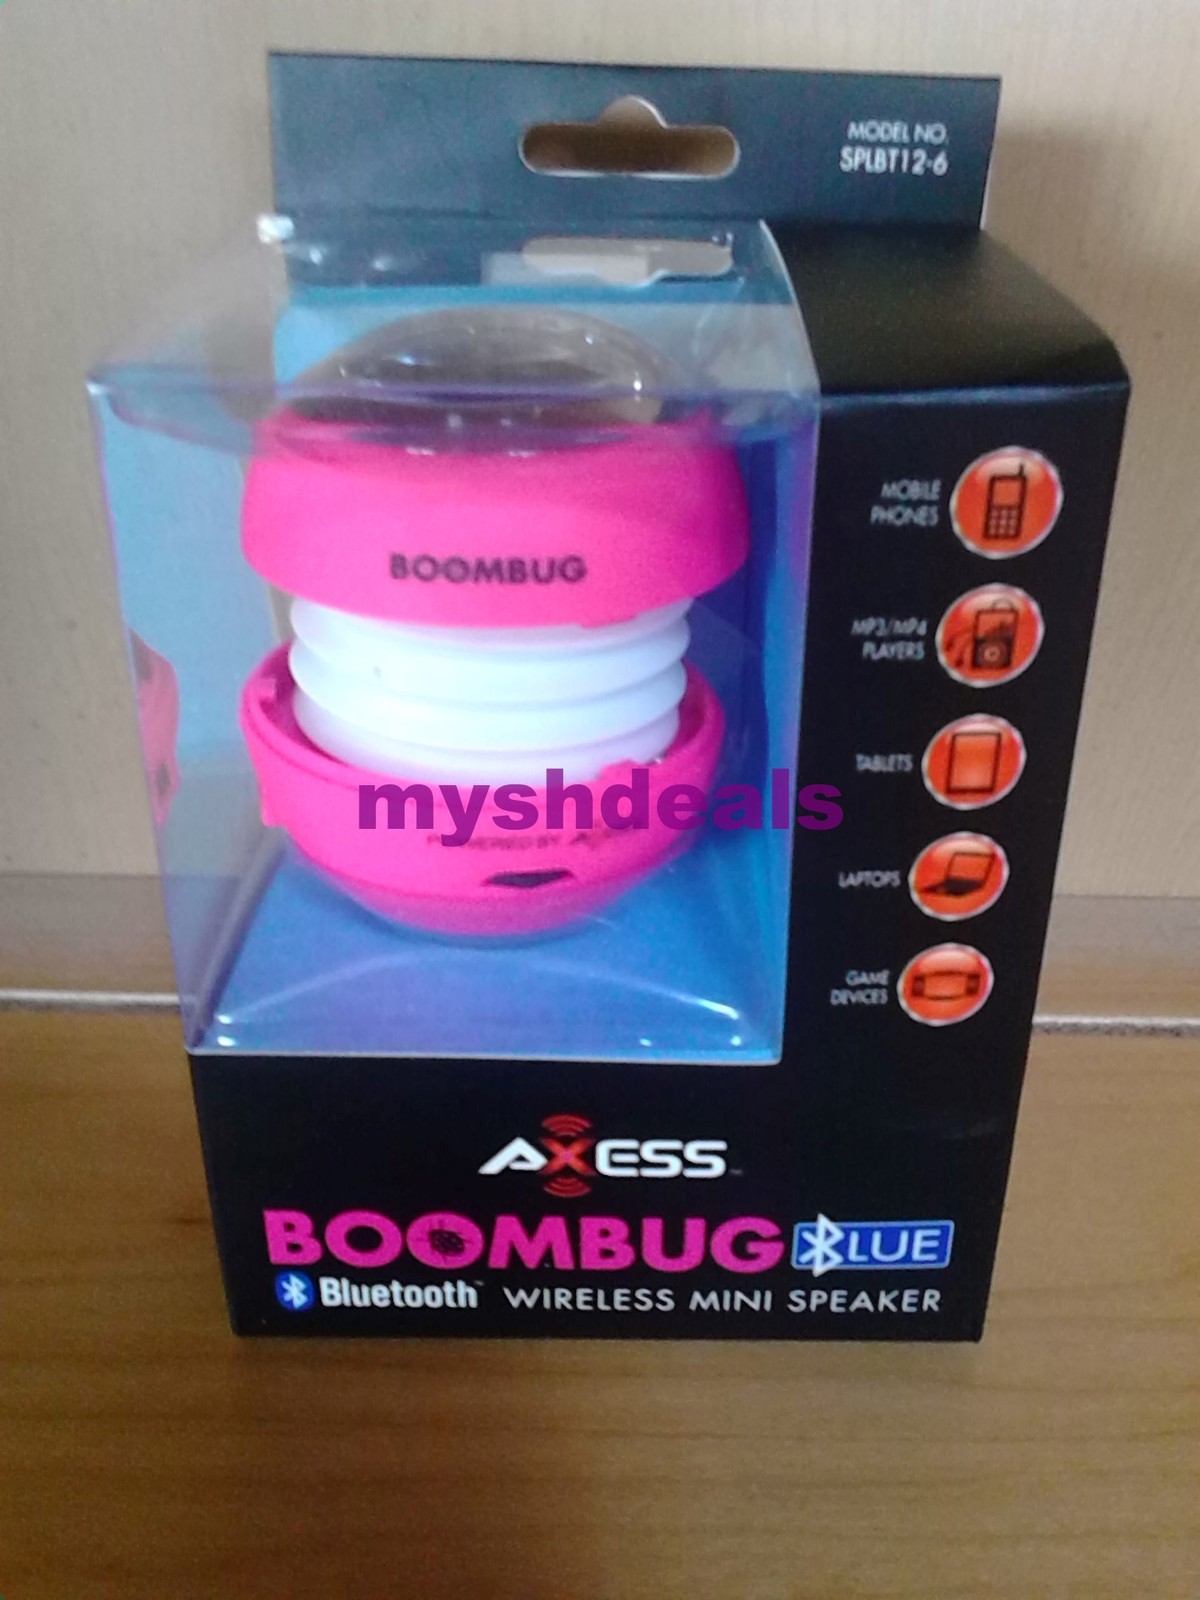 Primary image for Axess Boombug Portable Speaker - Bluetooth, Wireless Streaming